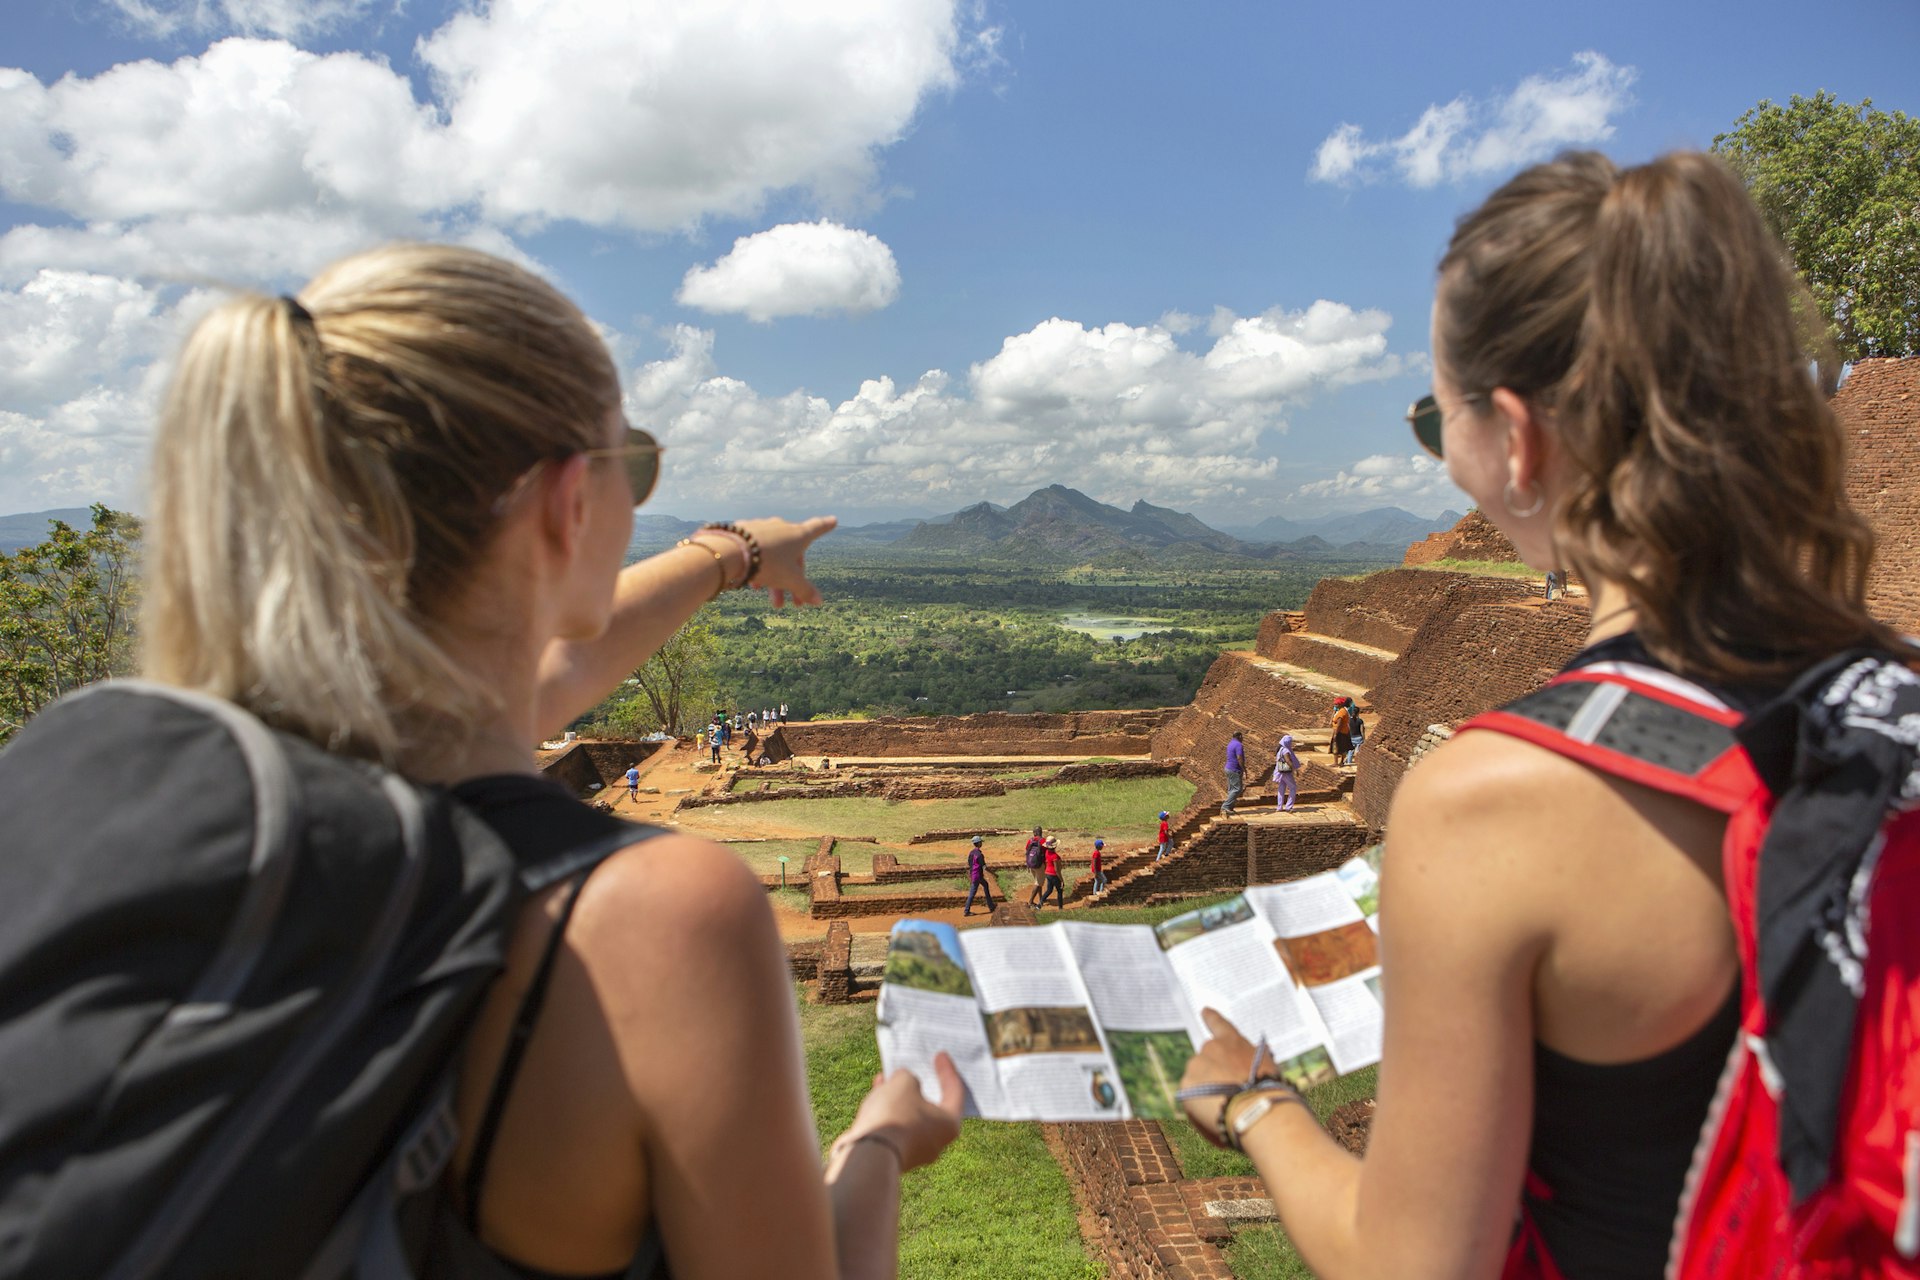 Two women hikers wearing backpacks on vacation at Sigiriya (Lion Rock) in central Sri Lanka